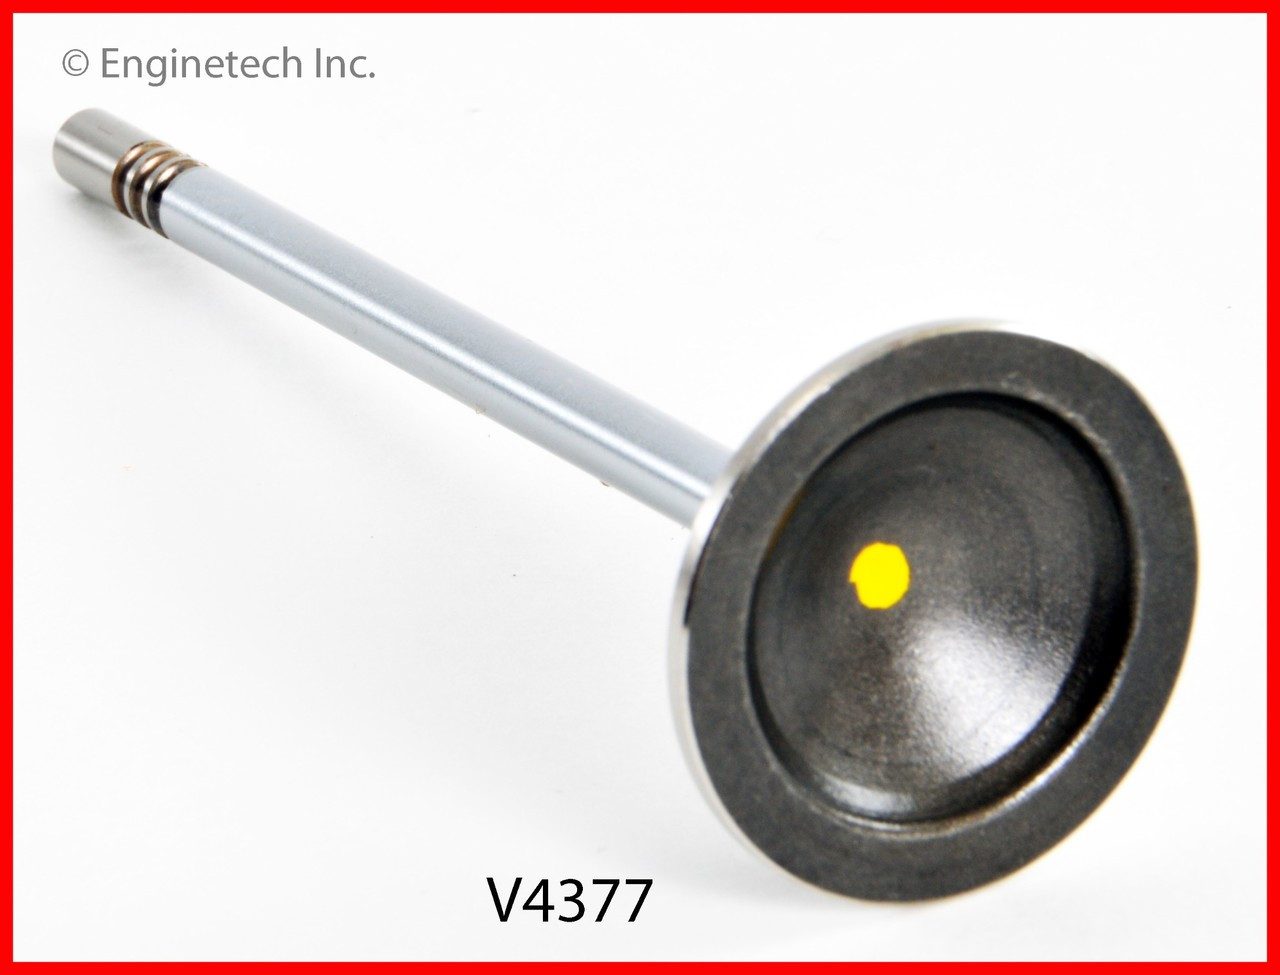 Exhaust Valve - 2004 Ford F-150 5.4L (V4377.A1)